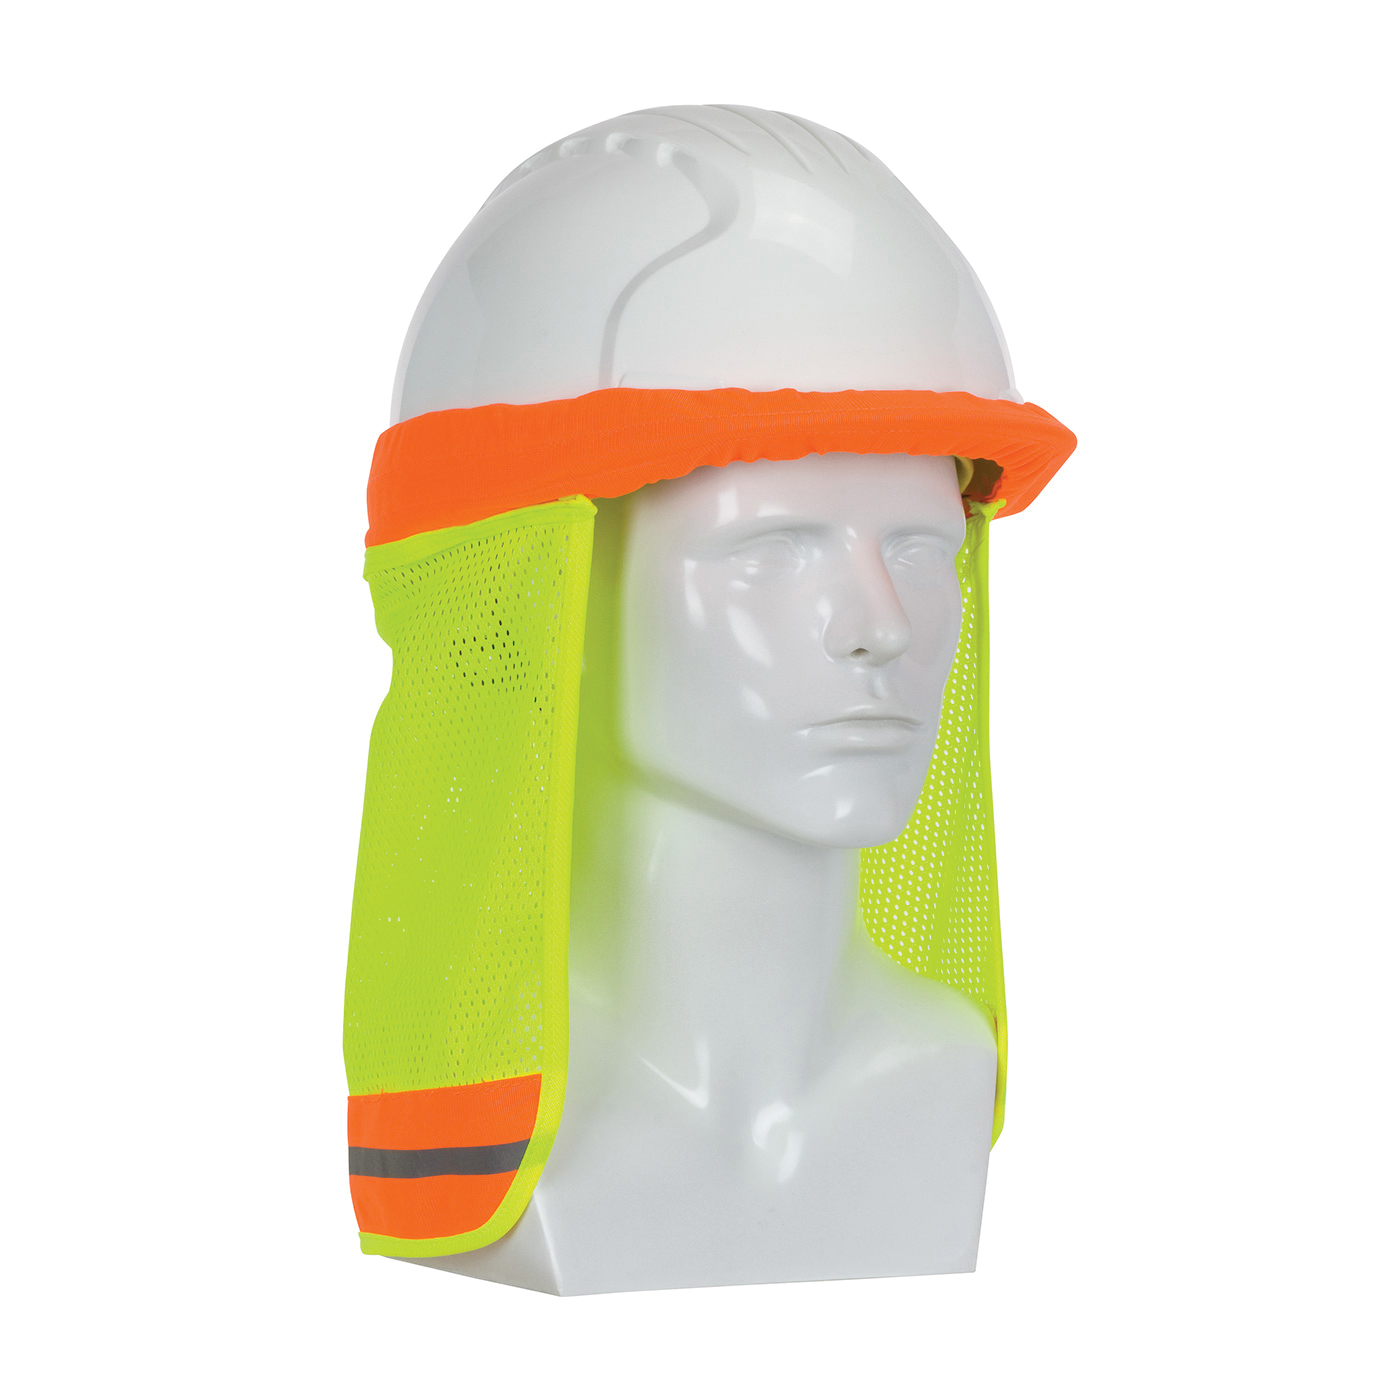 PIP® 396-700FR-YEL Hard Hat Neck Shade, For Use With Most Cap Style and Full Brim Hard Hats